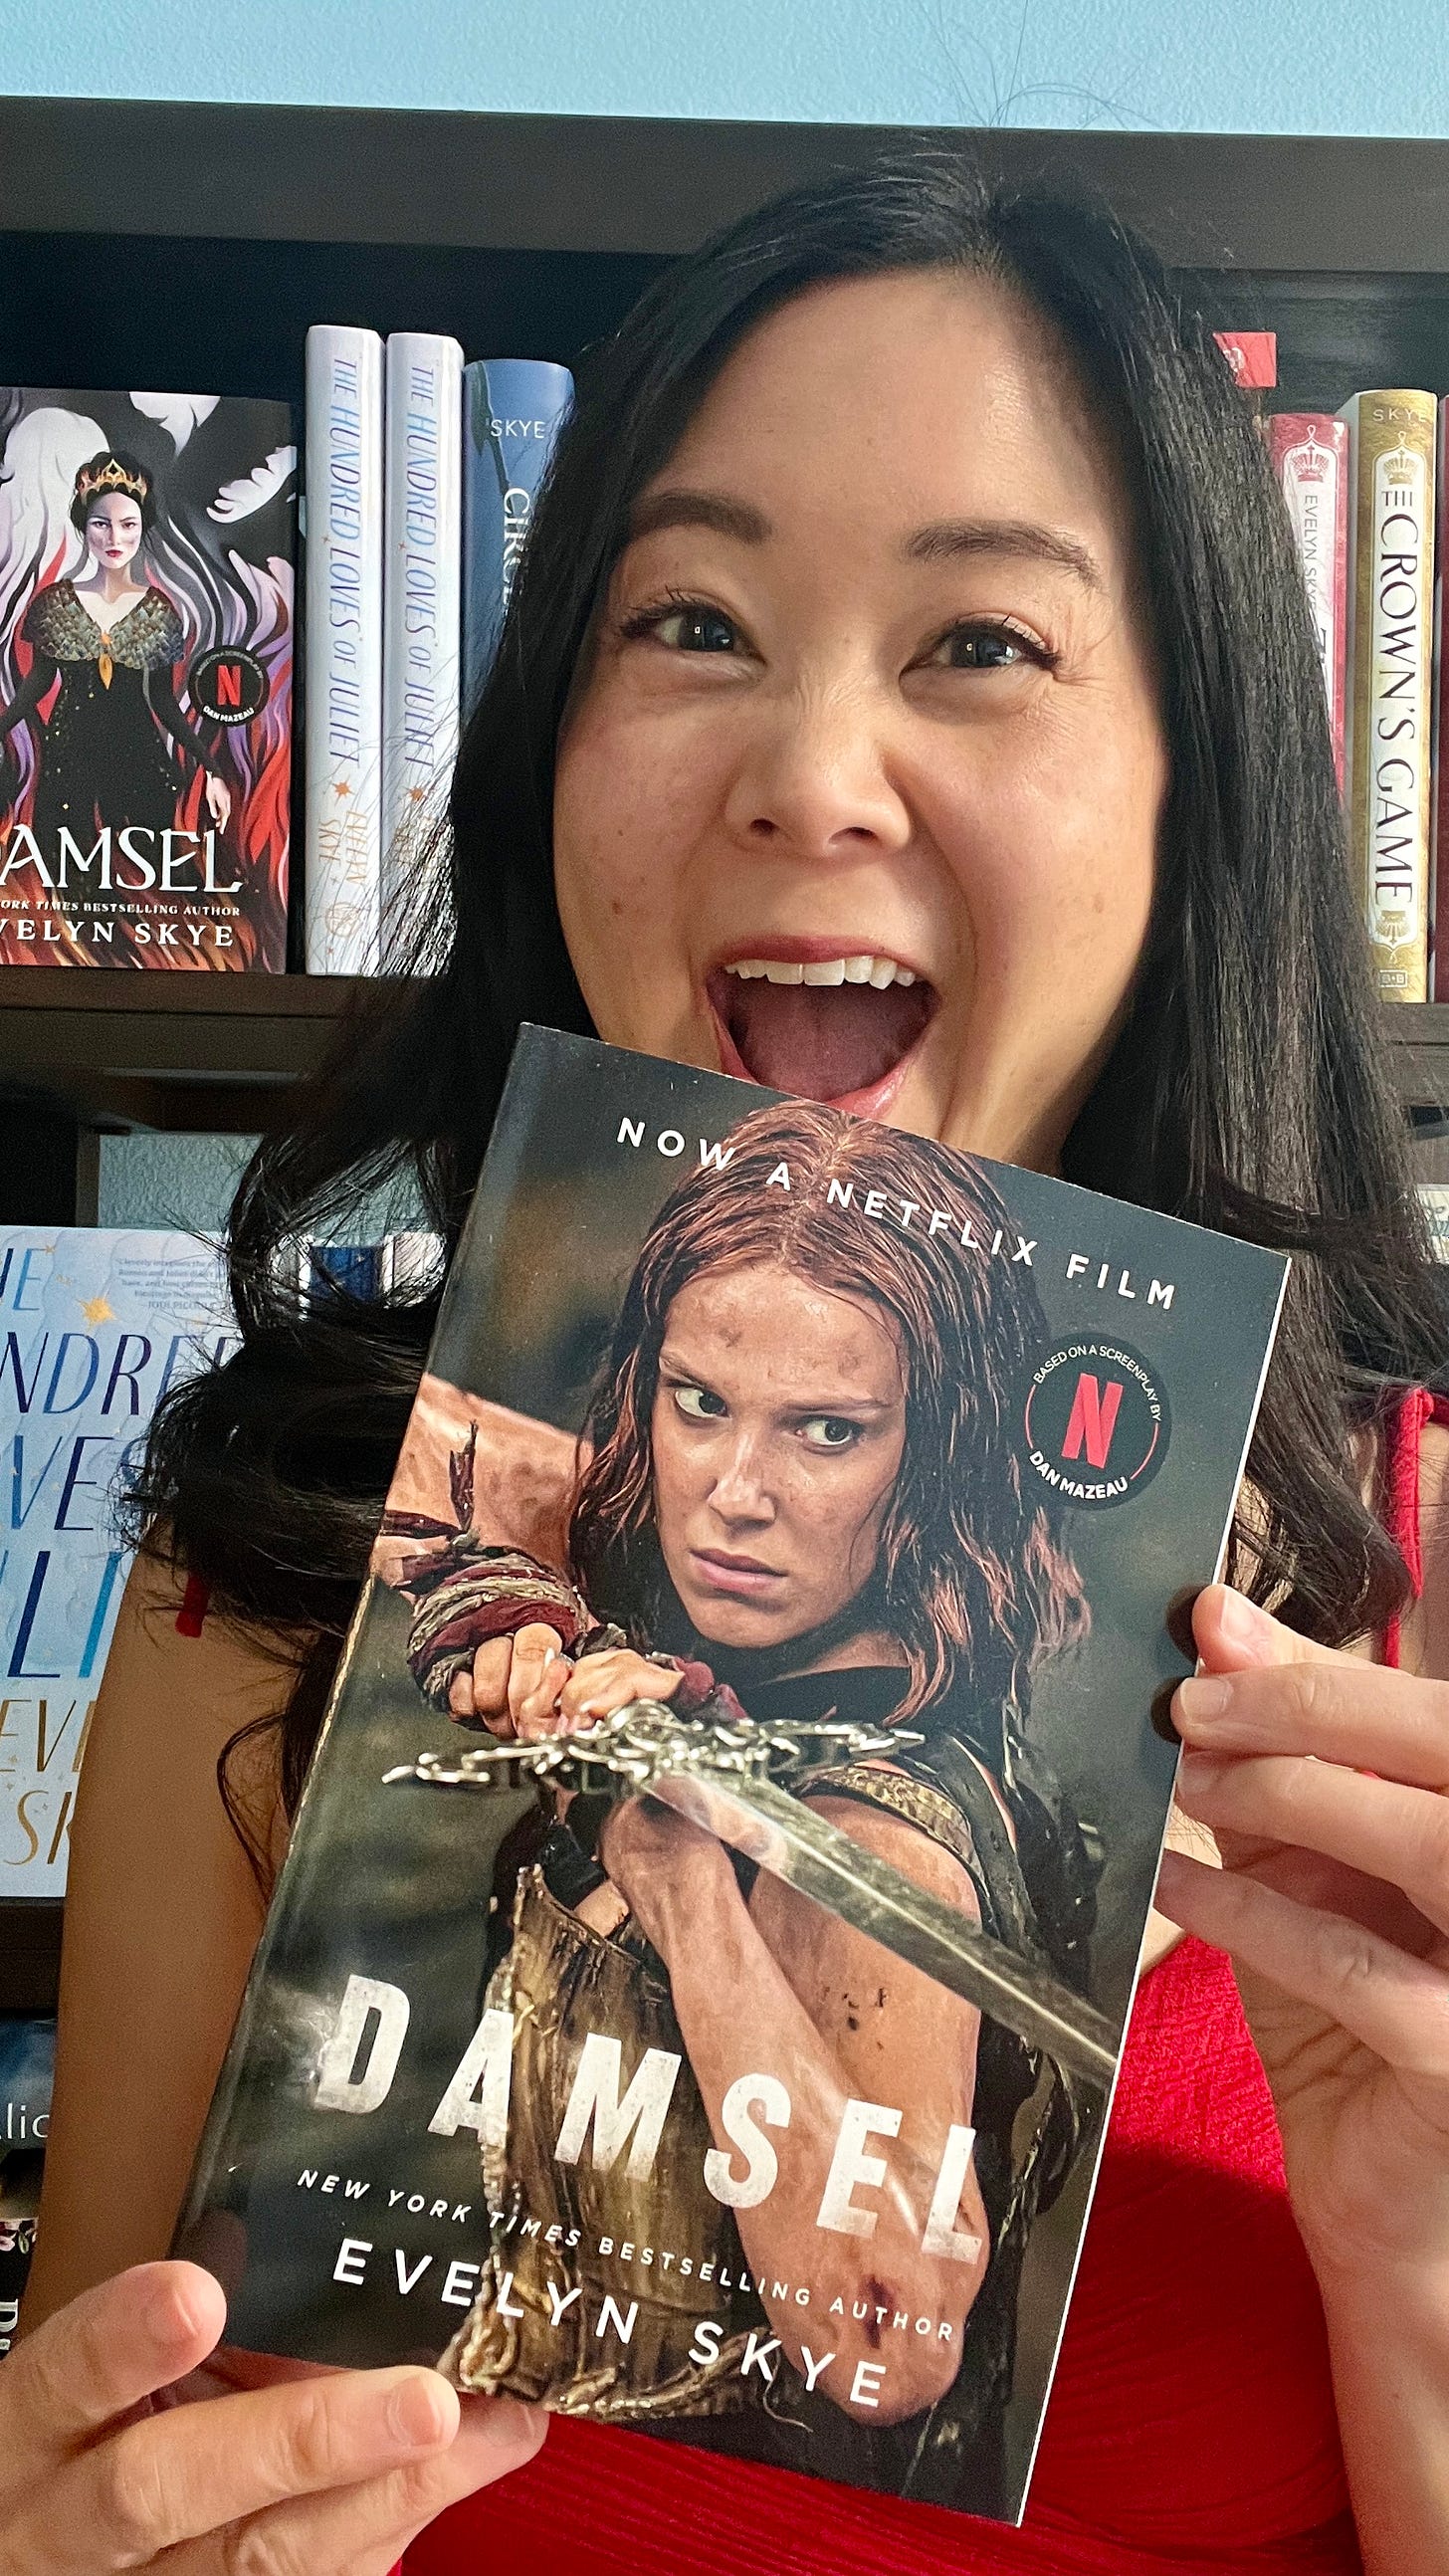 Author Evelyn Skye with a copy of DAMSEL